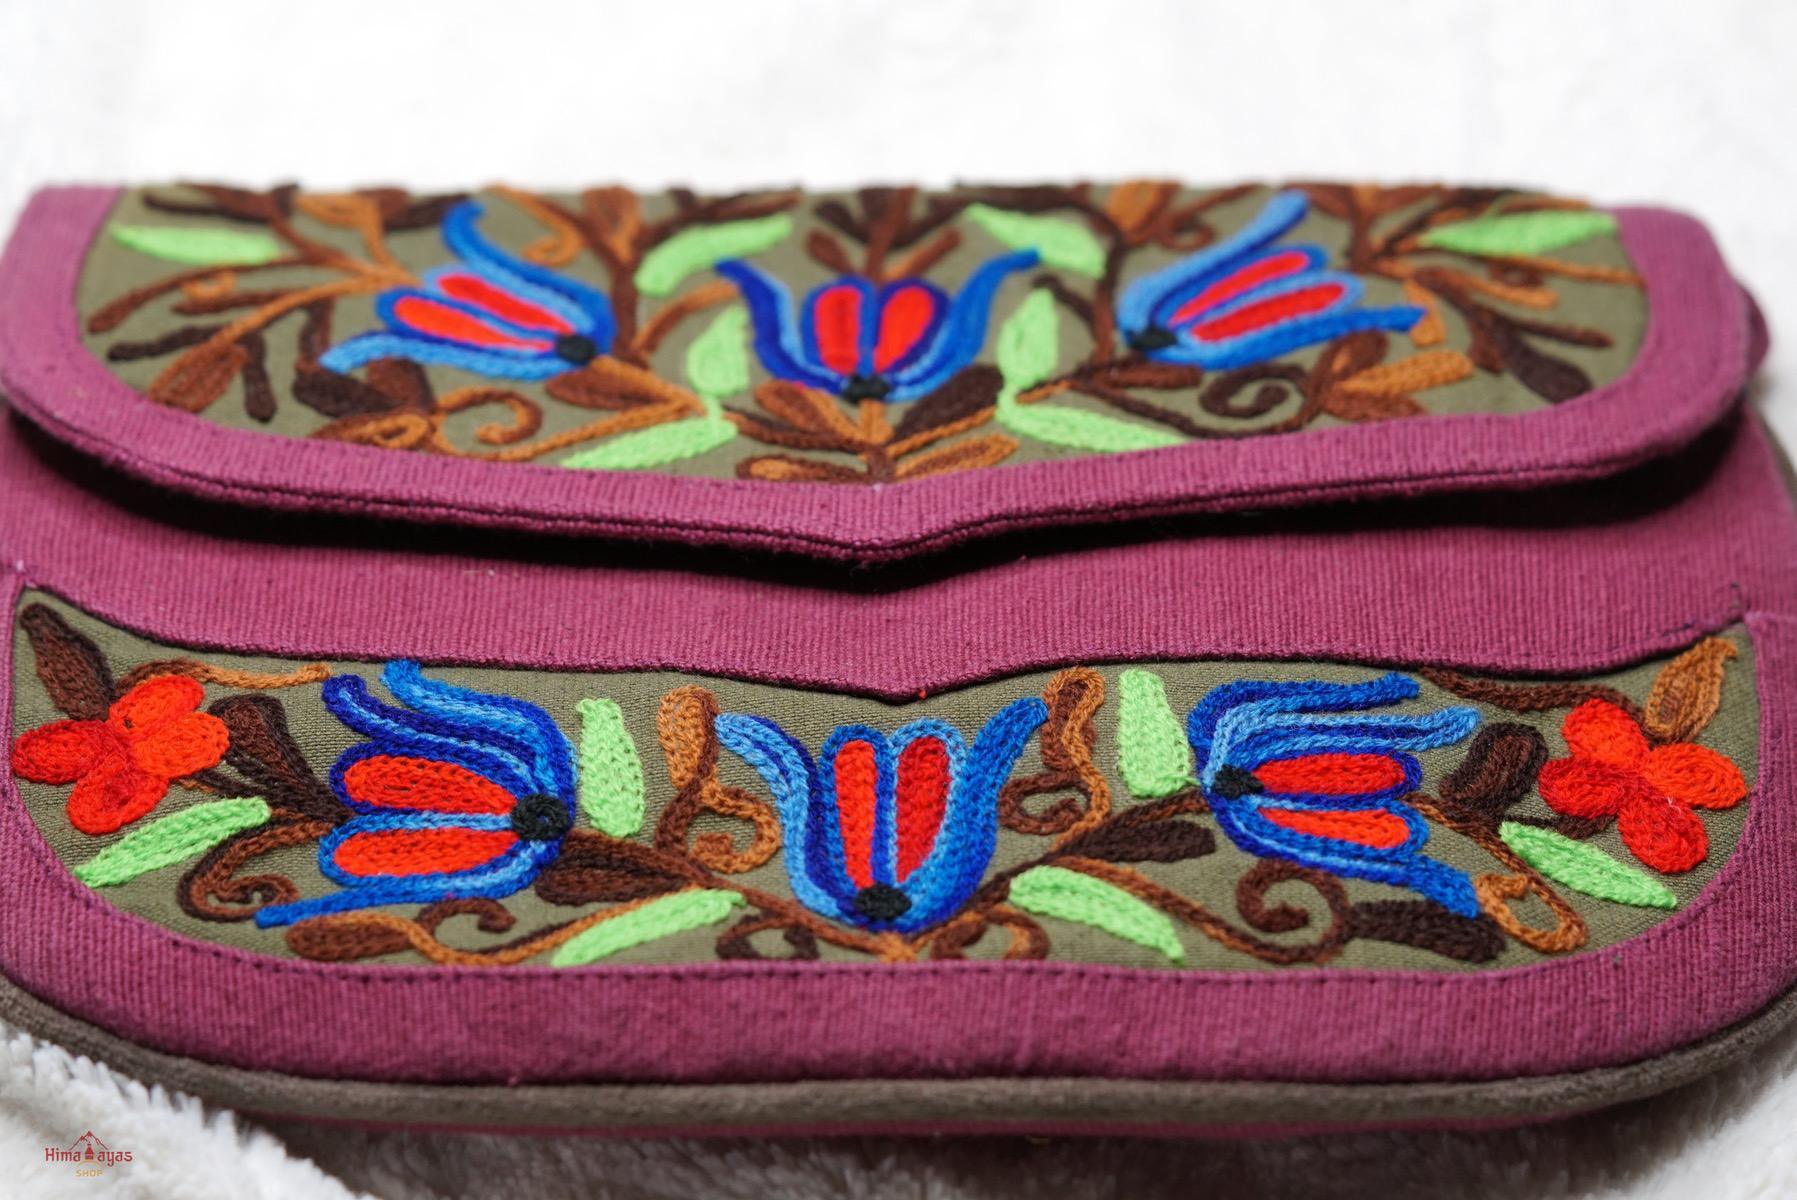 A unique style eco-friendly women's crossbody bag with hand embroidery, crafted ethically from Himalayas.